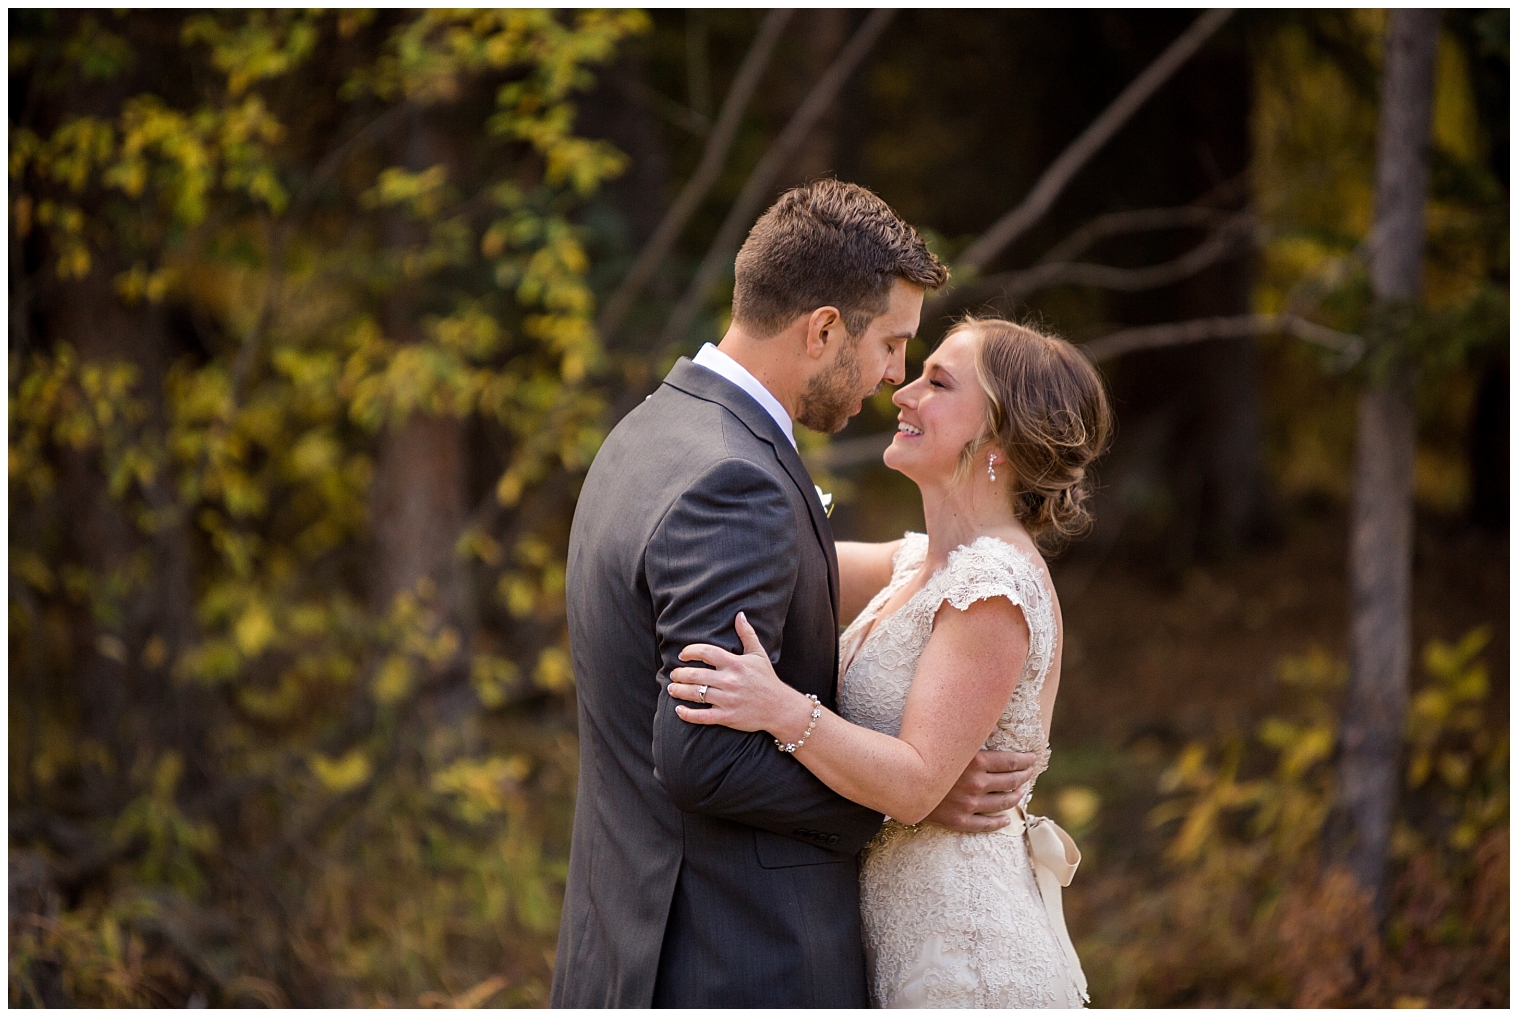 During their first look at their Copper Mountain wedding, the bride and groom hold each other and lean in for a kiss.